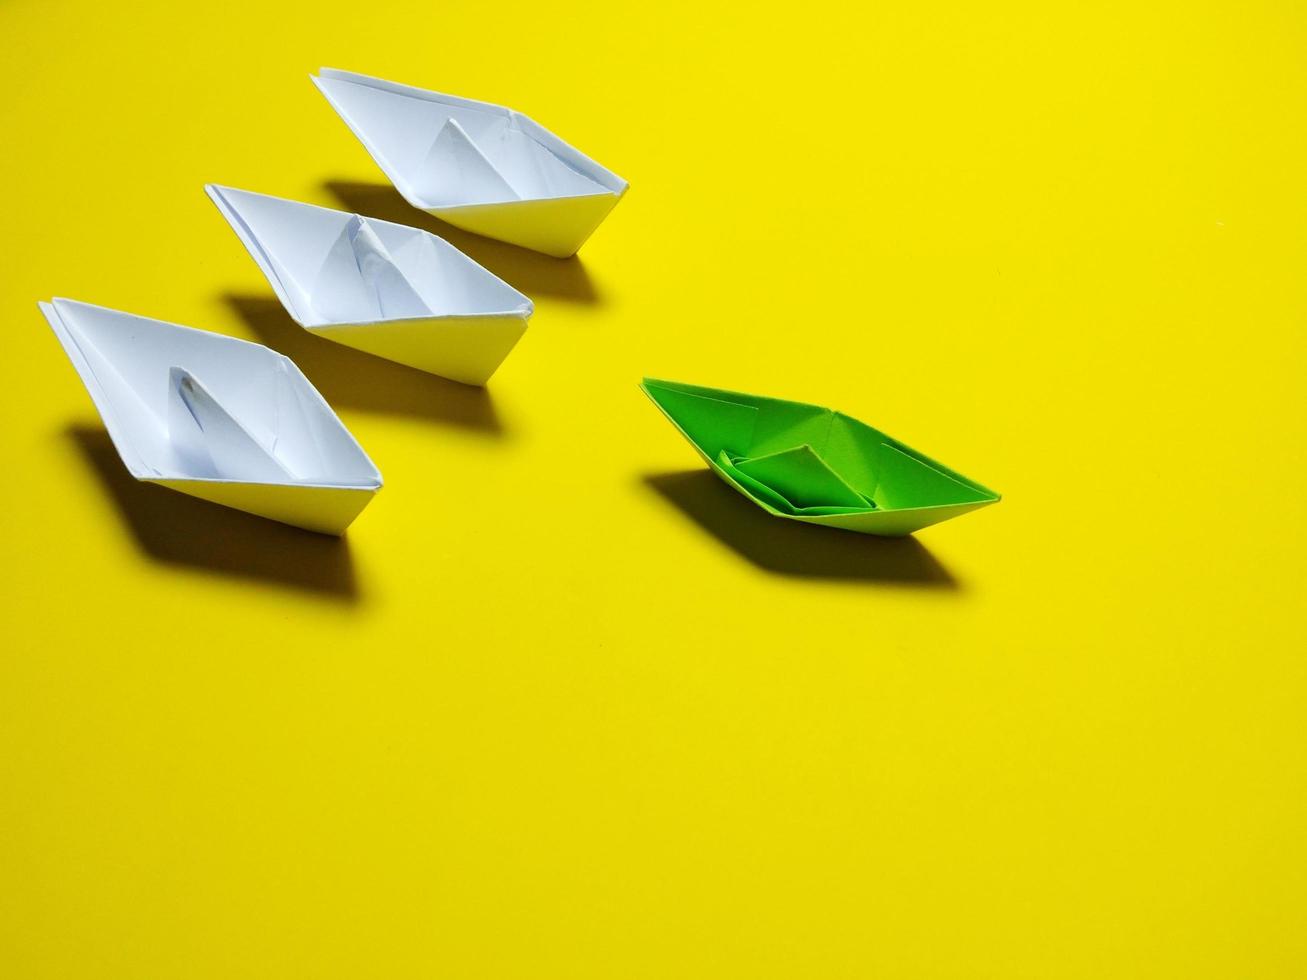 white and green paper boat yellow background in an orderly manner, providing ideas, leadership and effective management give a feeling have solidarity success, love, happiness, great photo